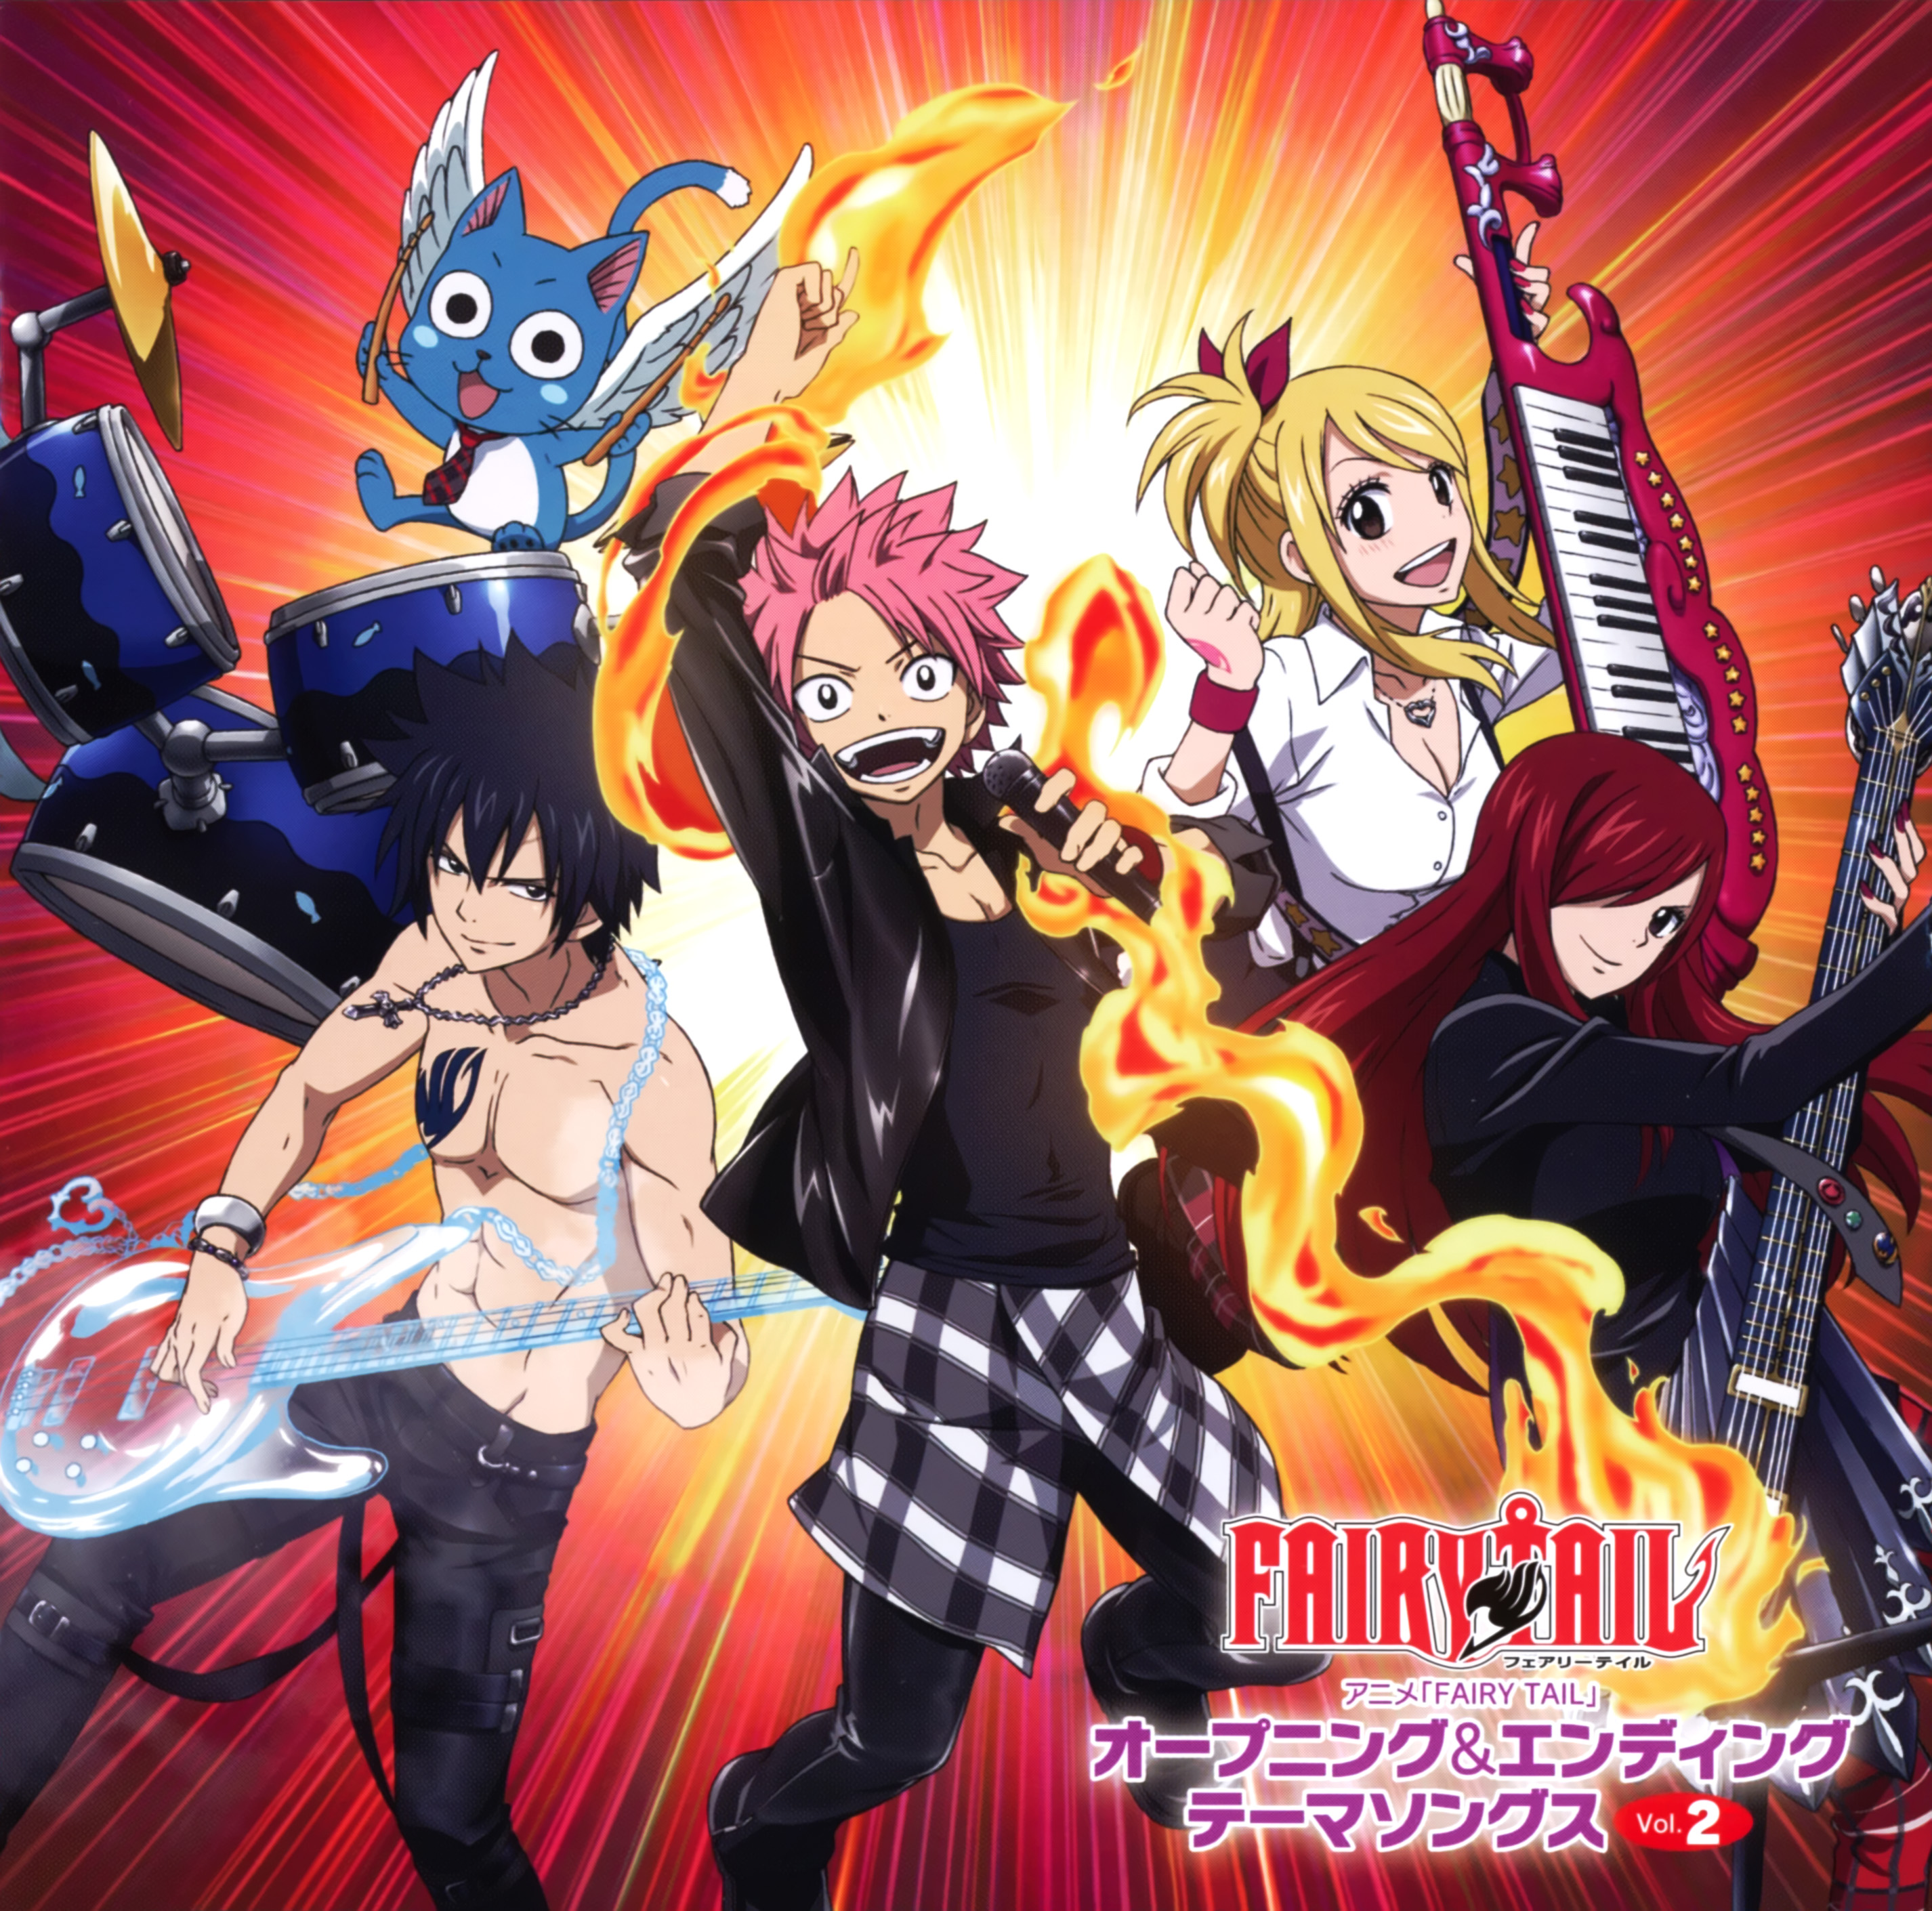 Fairytail Season 2 image Rock band! HD wallpapers and backgrounds